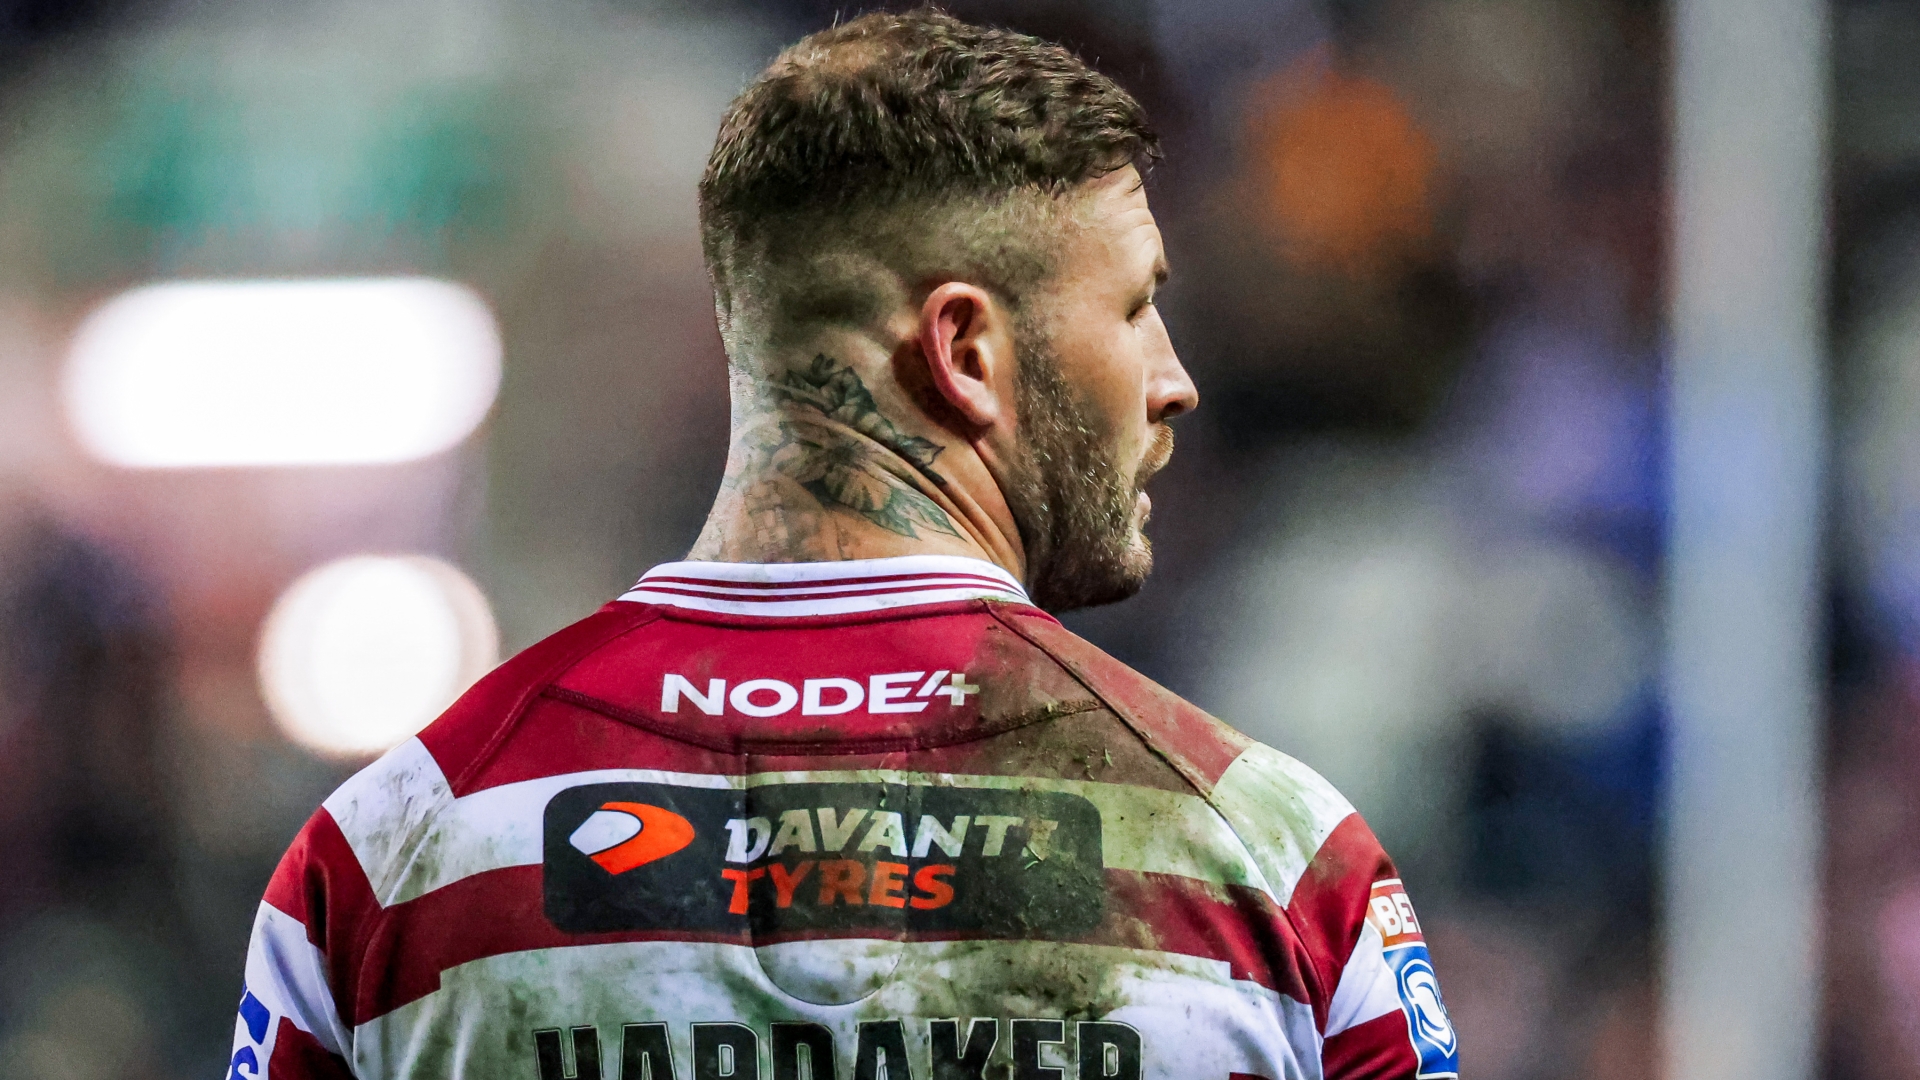 Zak Hardaker released by Wigan after latest disciplinary issues